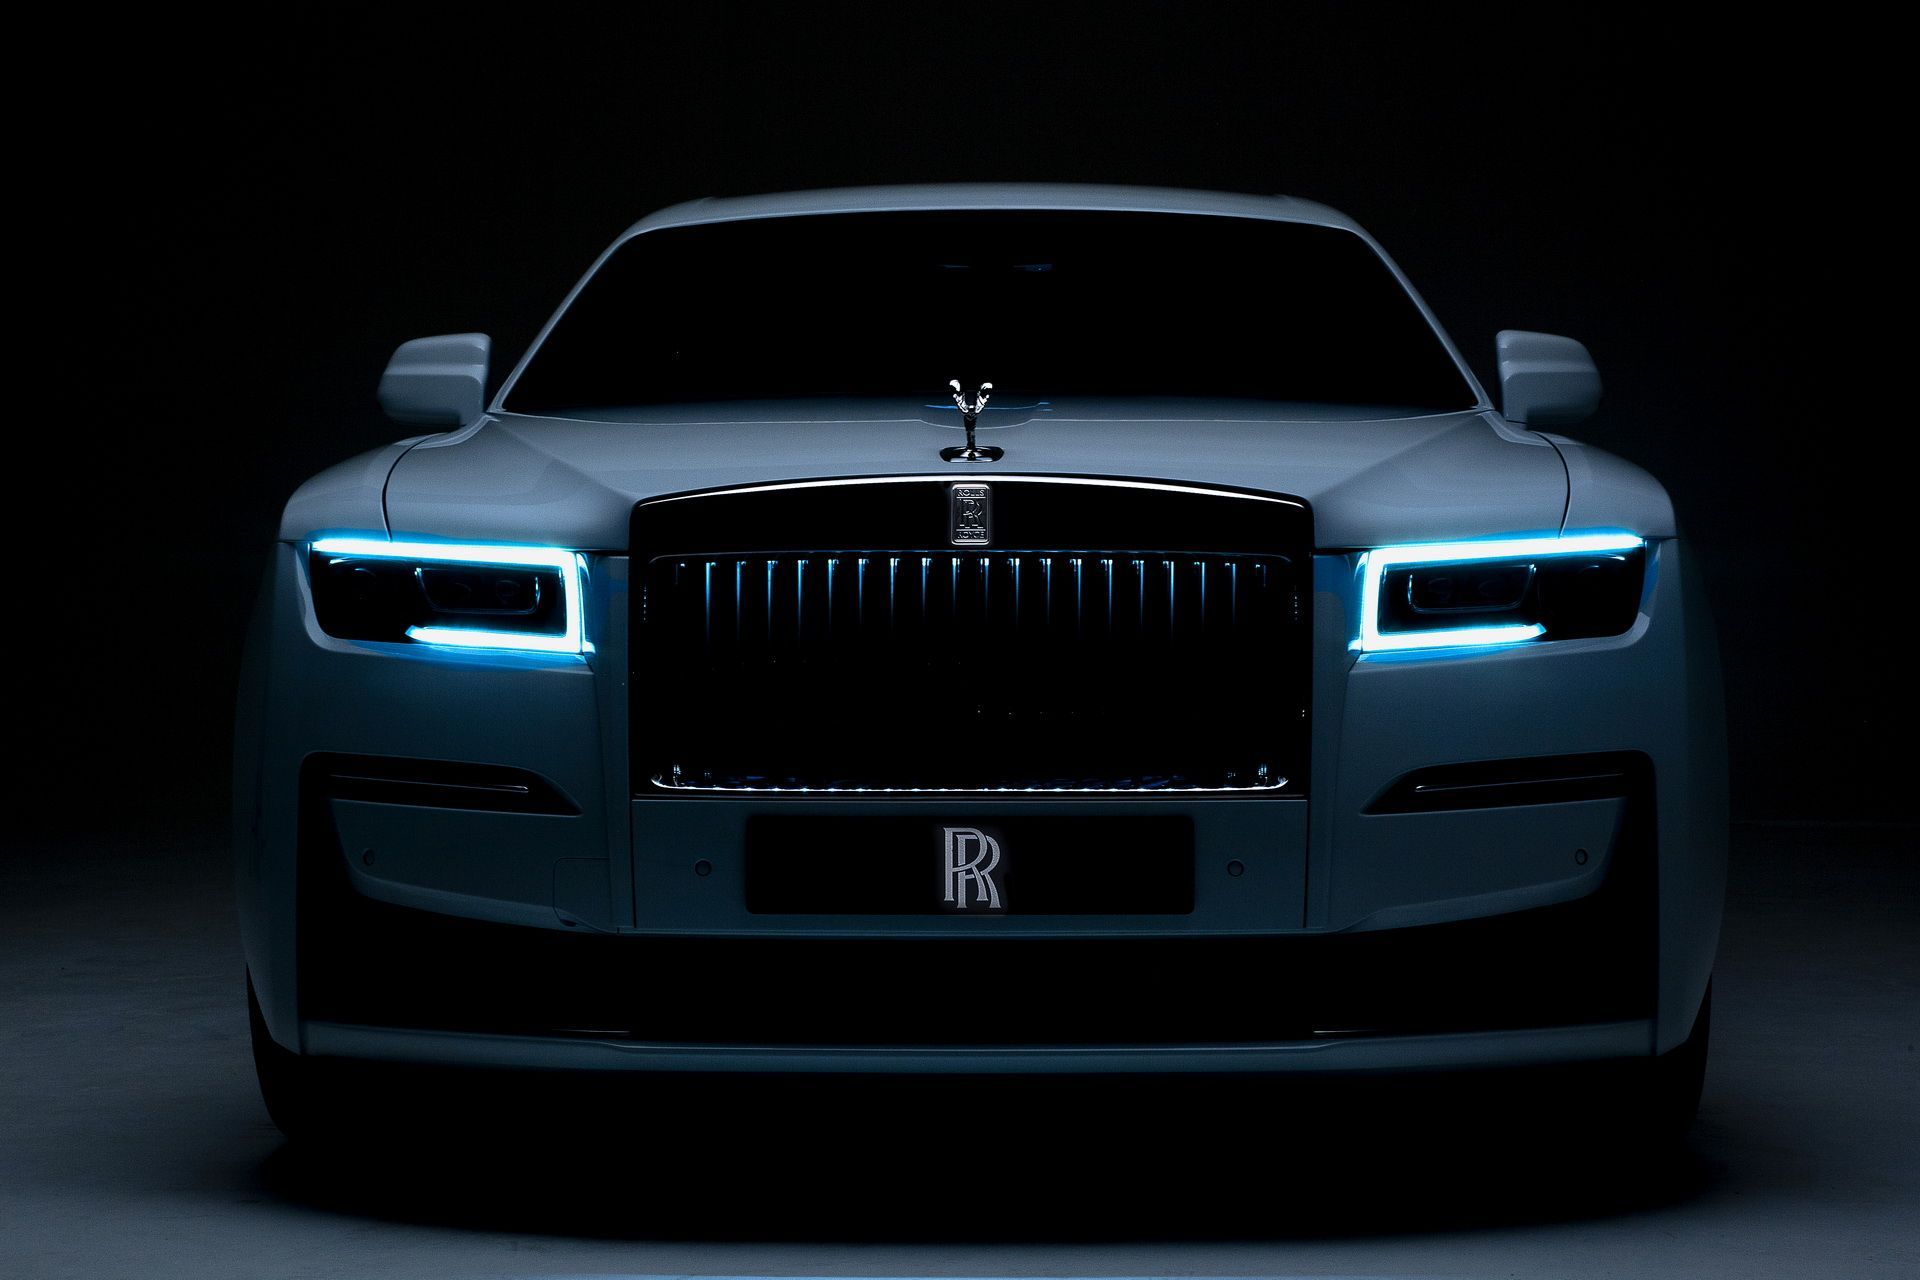 HD 4K rolls royce wraith Wallpapers for Mobile